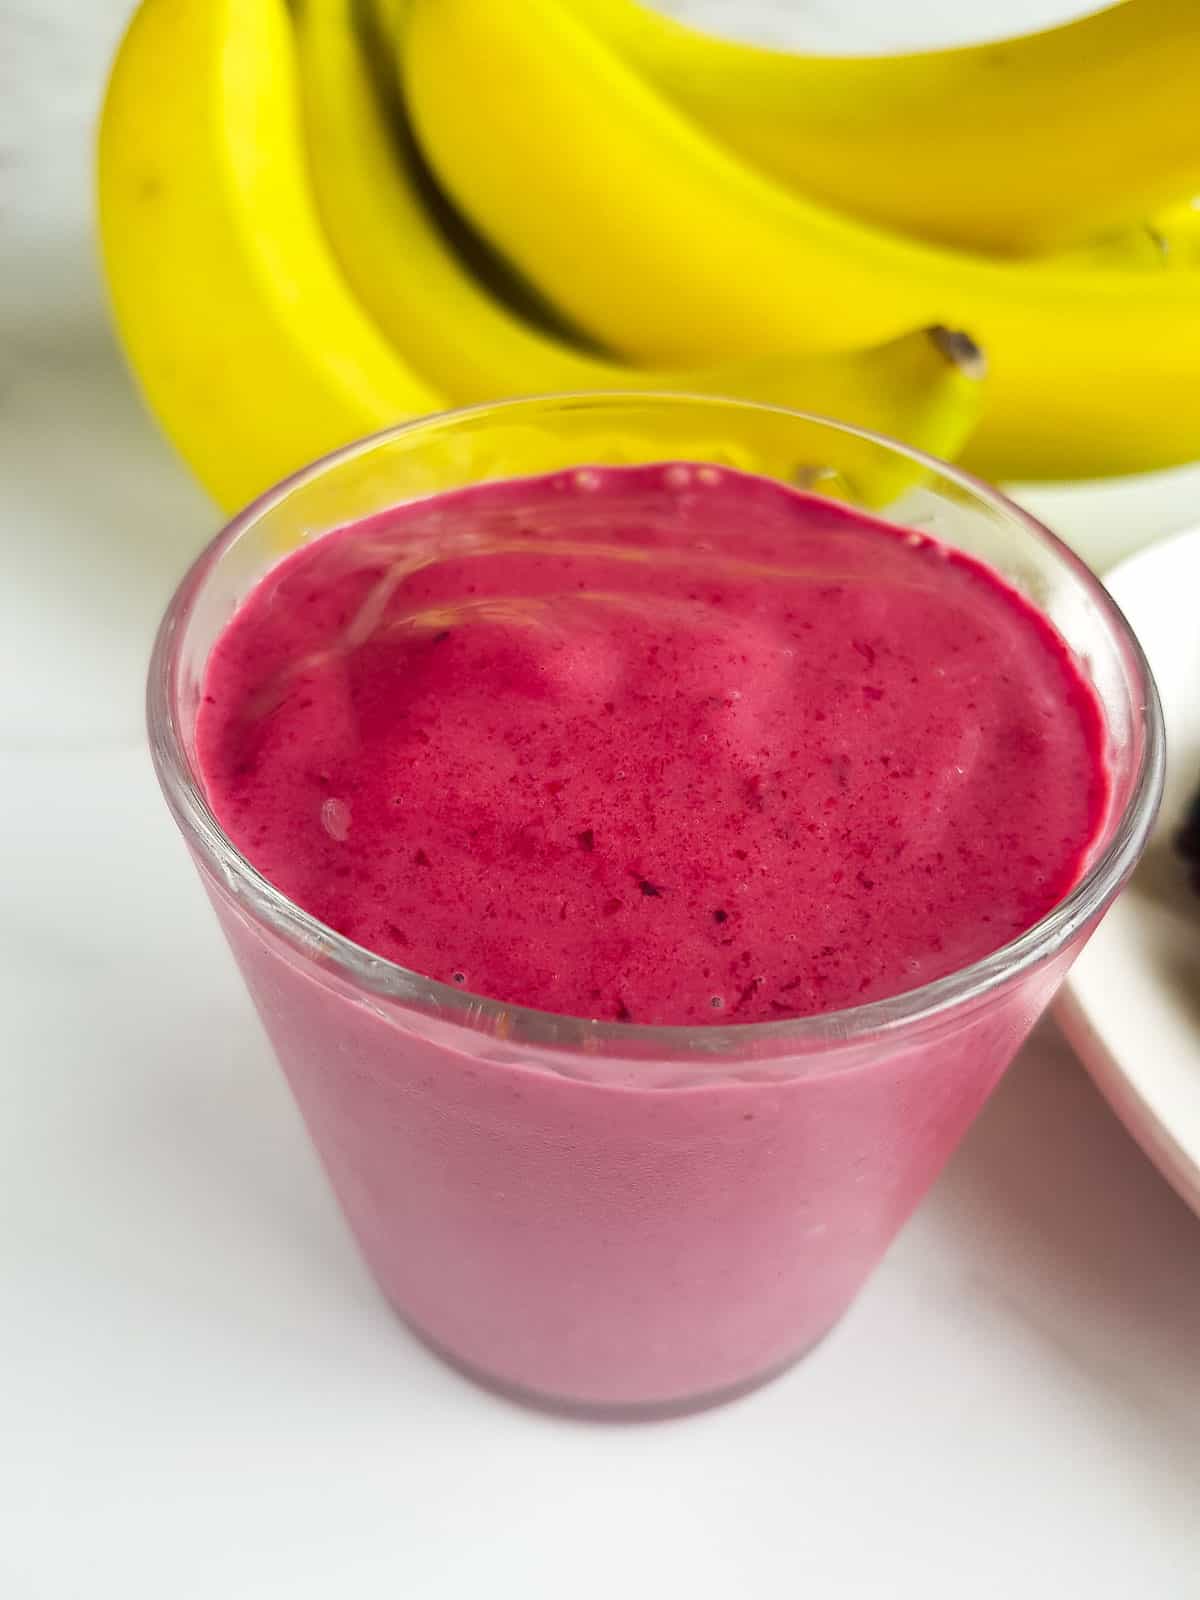 A glass of pink smoothie with bananas in the background.